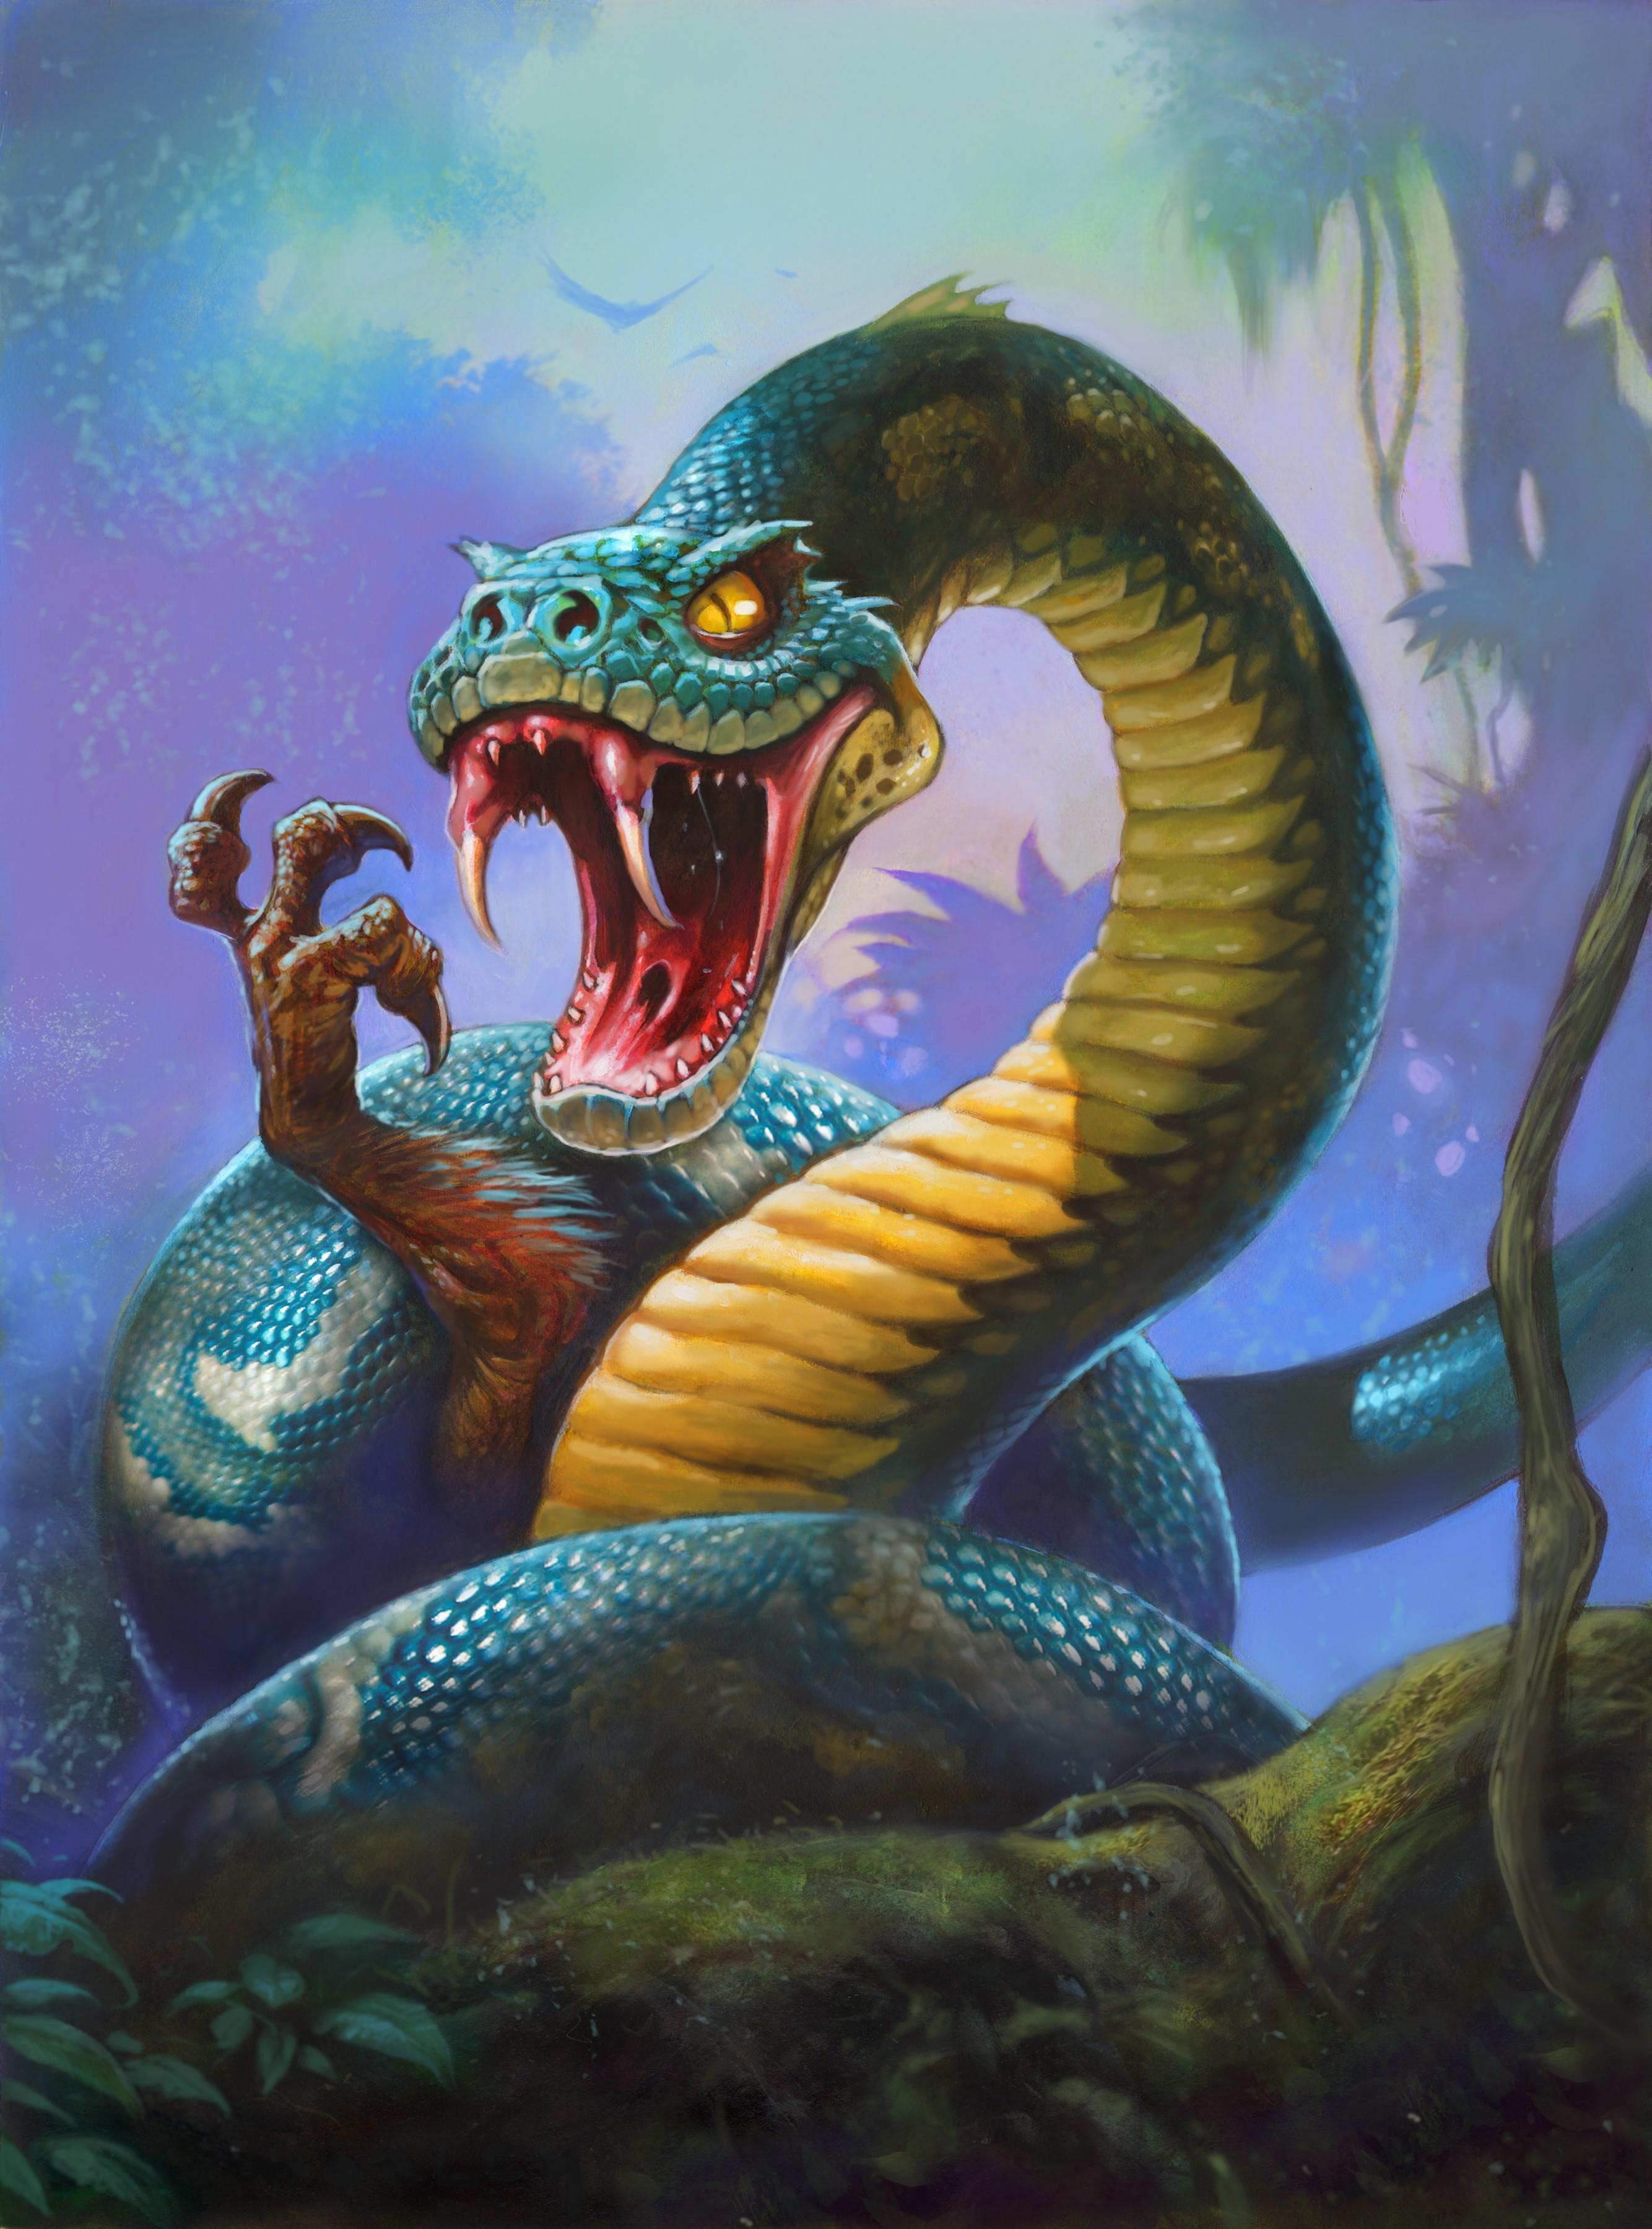 HD wallpaper, Canine Tooth Fangs, Giant Anaconda, Hearthstone  Heroes Of Warcraft, Roar, Snakes